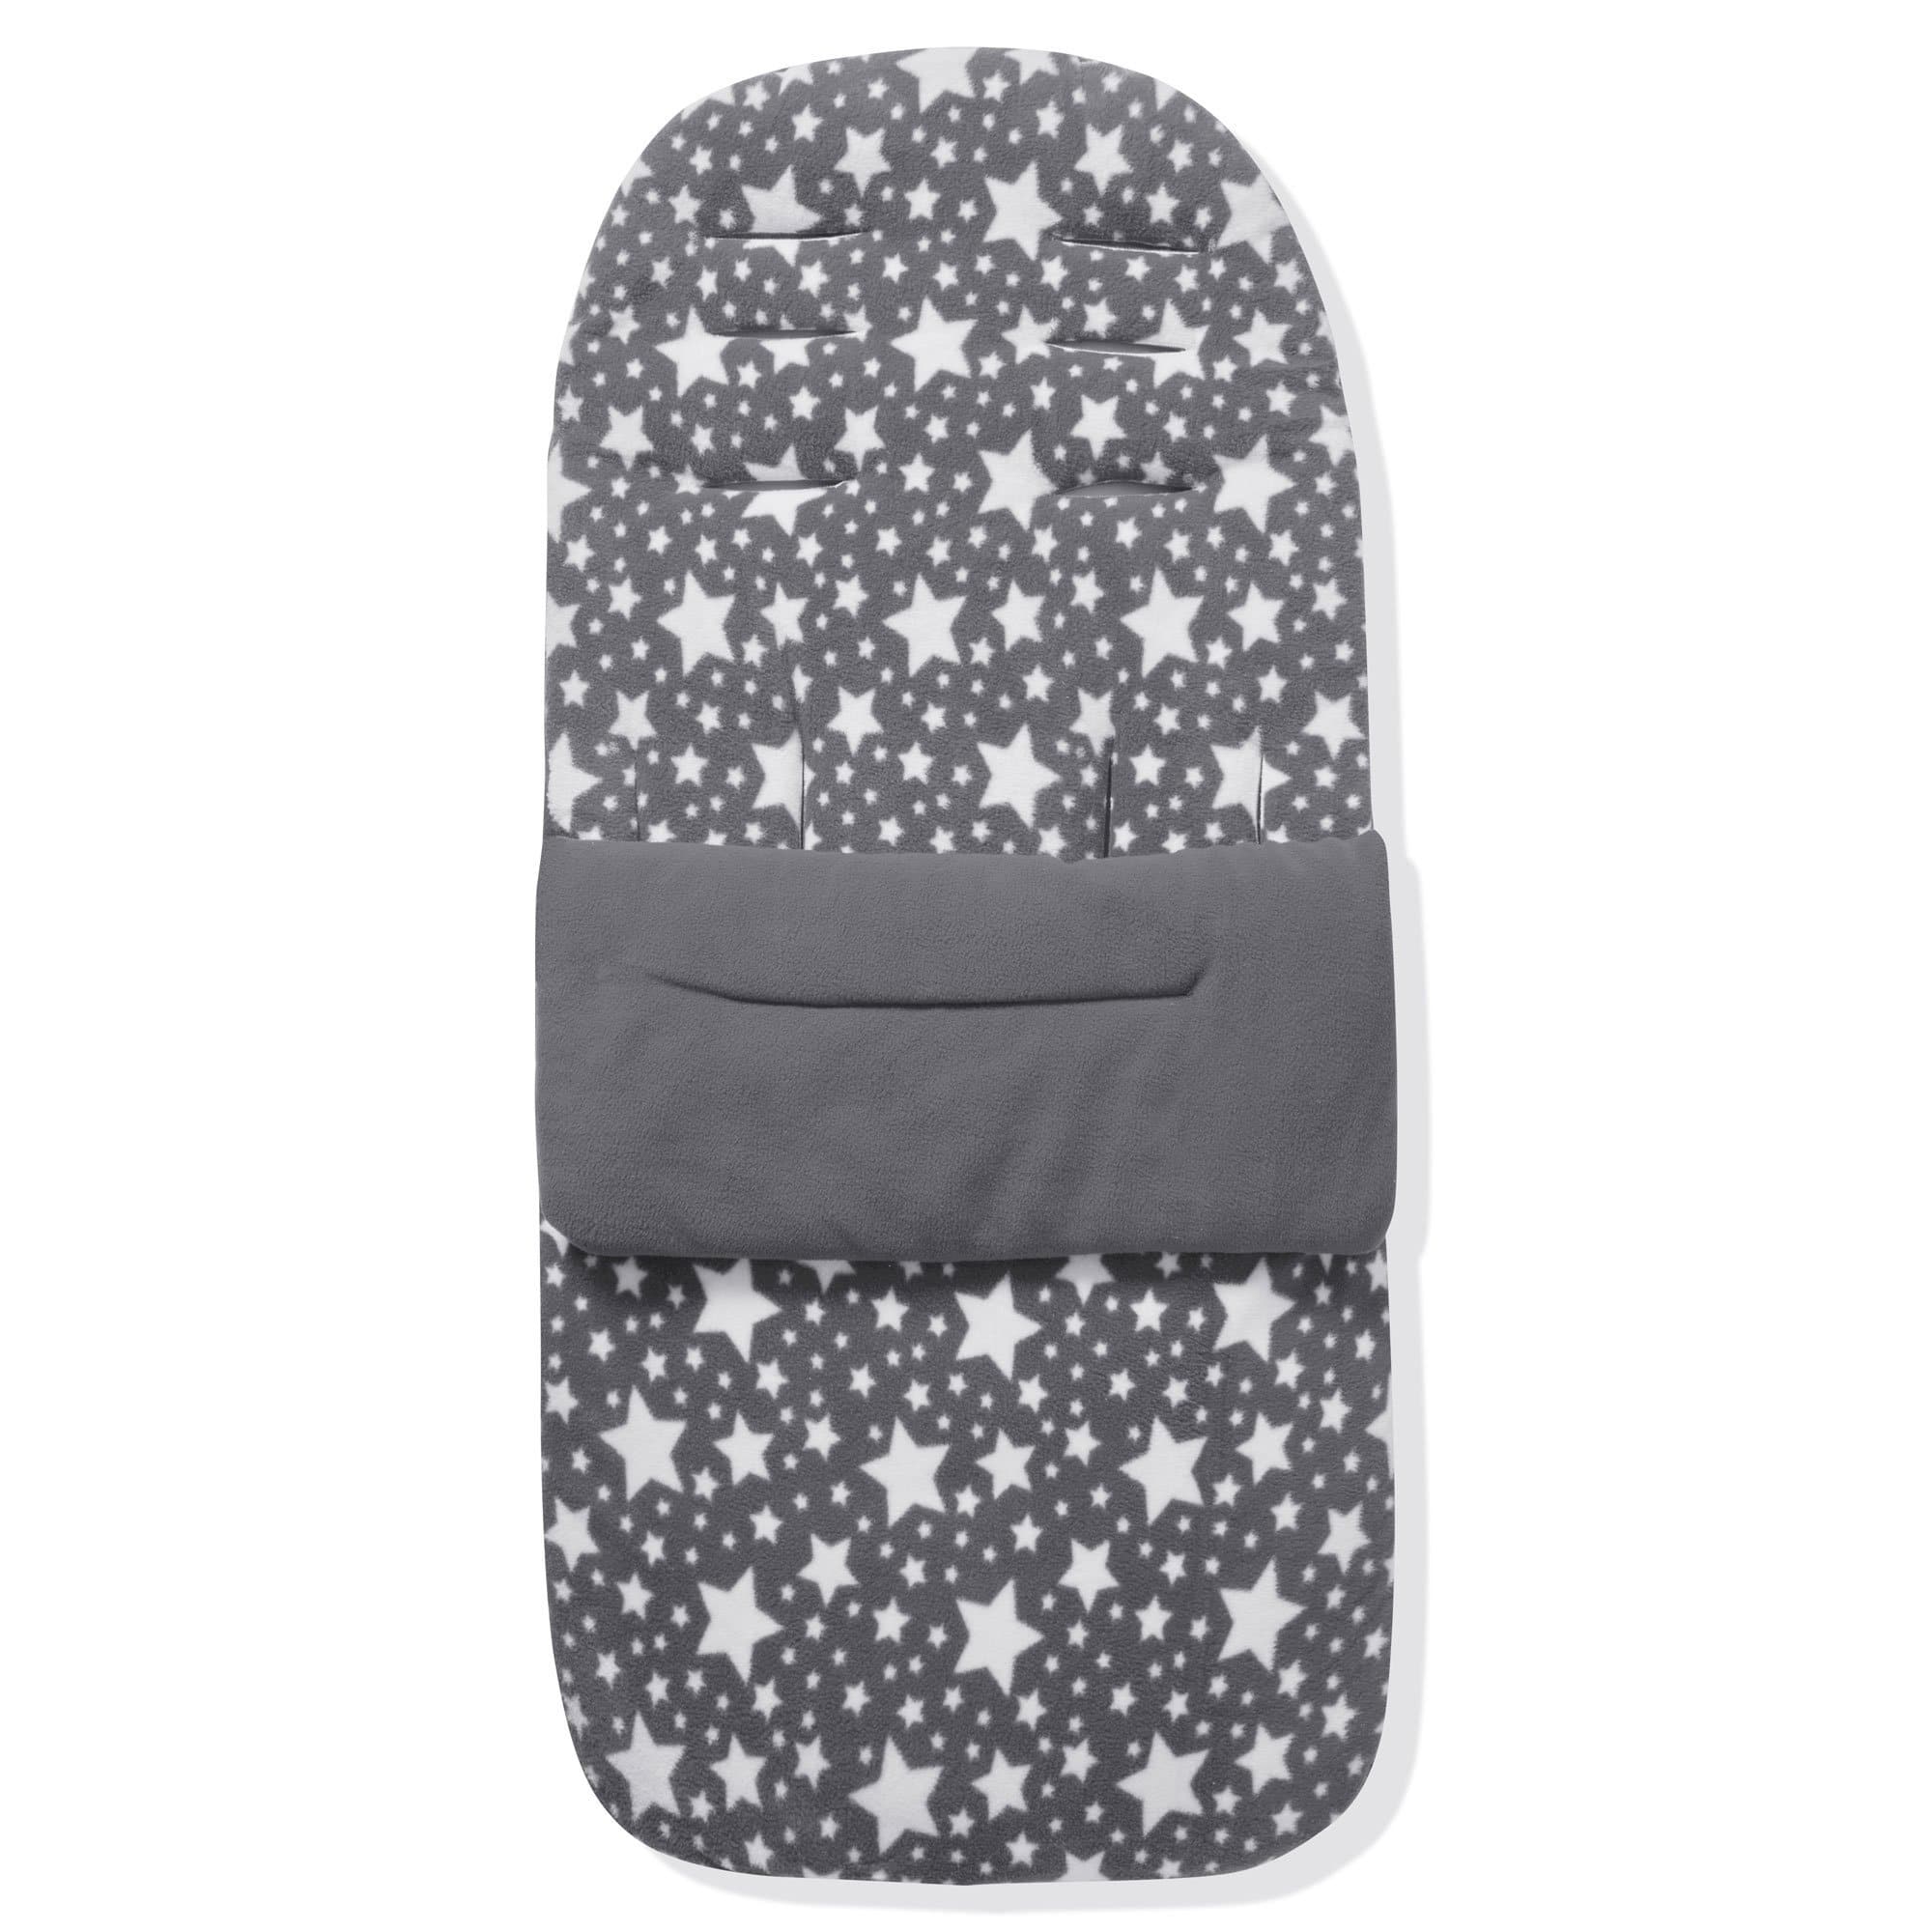 Fleece Footmuff / Cosy Toes Compatible with Red Castle - Grey Star / Fits All Models | For Your Little One